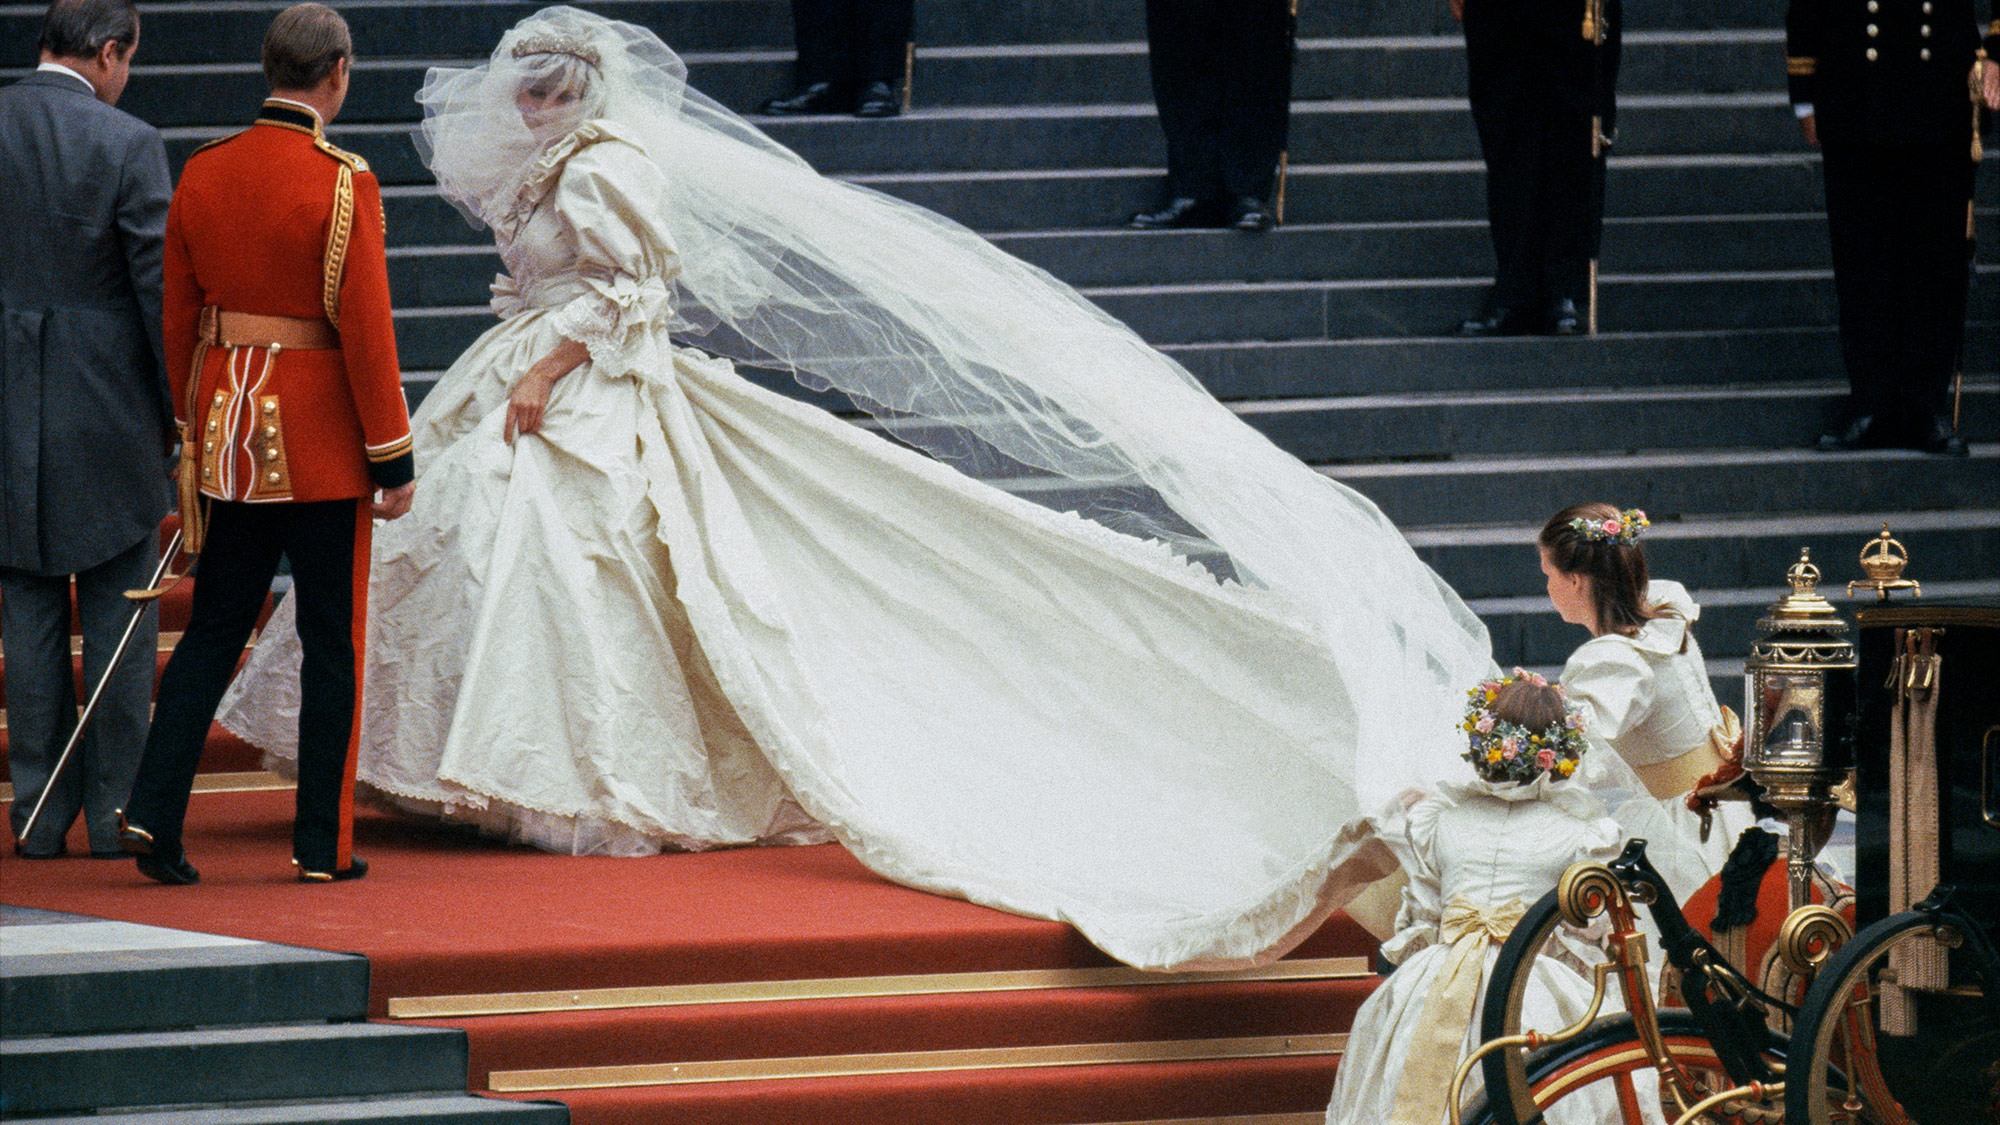 Literally everything you need to know about Princess Diana’s wedding dress